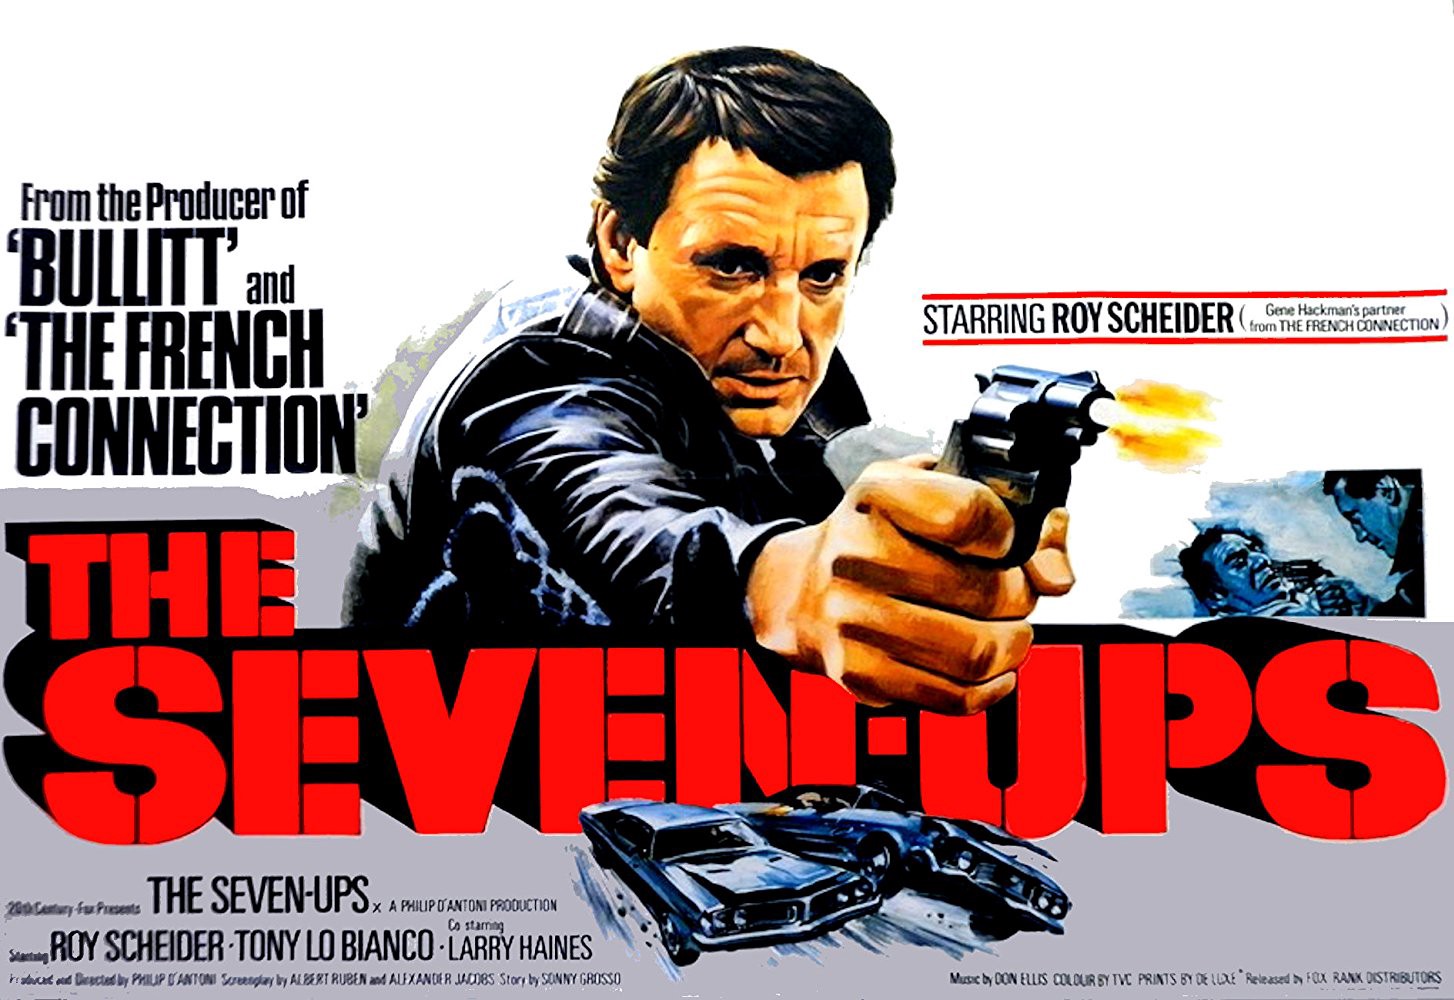 32-facts-about-the-movie-the-seven-ups